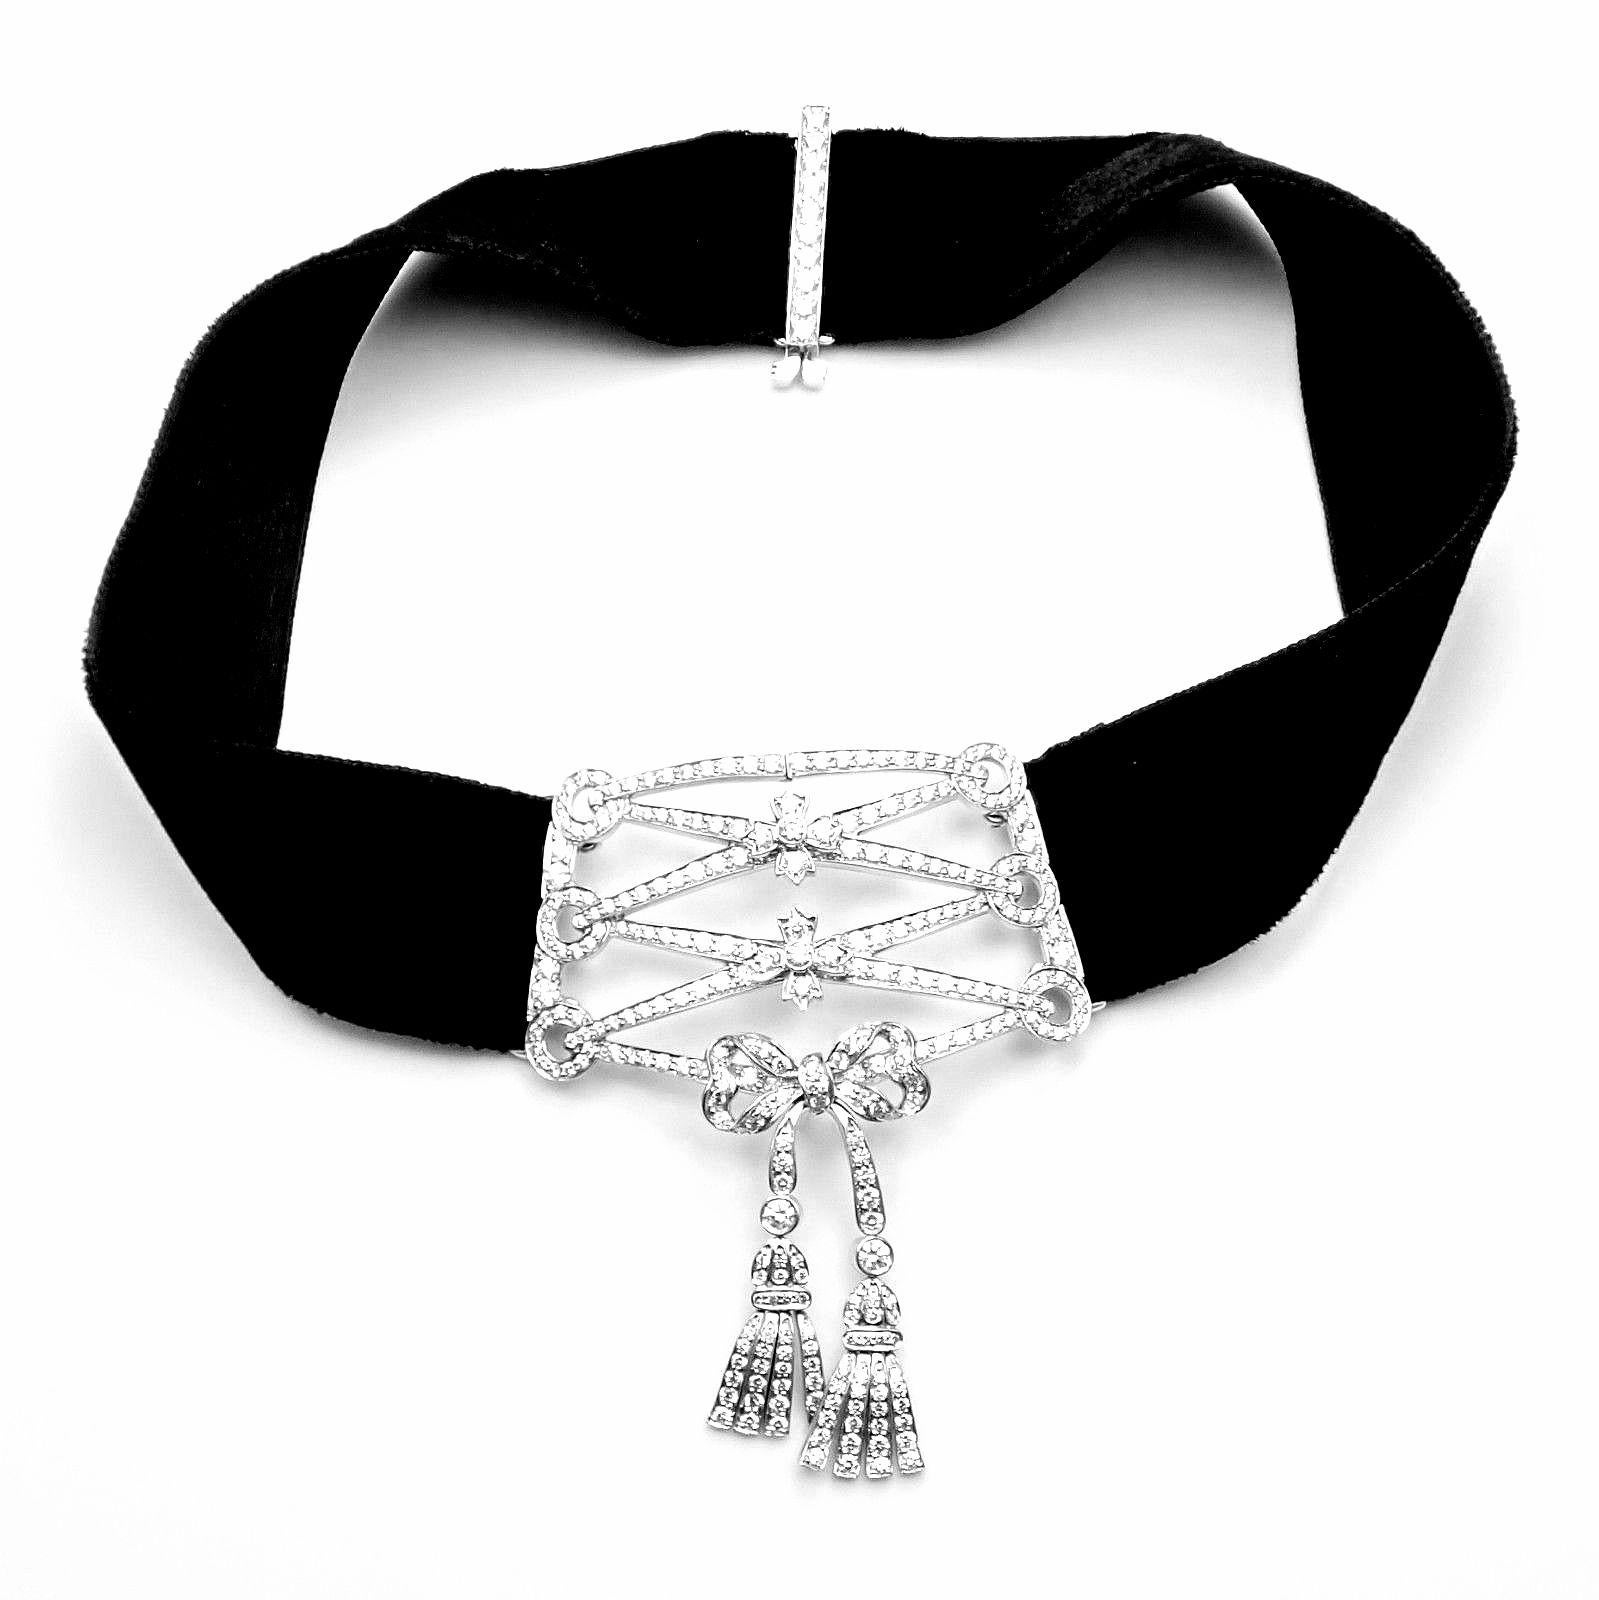 Platinum Diamond Corset Set Of Two Necklaces Pearls And Black Velvet Collar by Tiffany & Co. 
With  Center Piece: 333x Diamonds, VVS2/G Color. Approx 6.5ctw
Pearl Attachement: 18x Diamonds, VVS2/G Color.  Approx 0.50ctw
272x Pearls, Very High